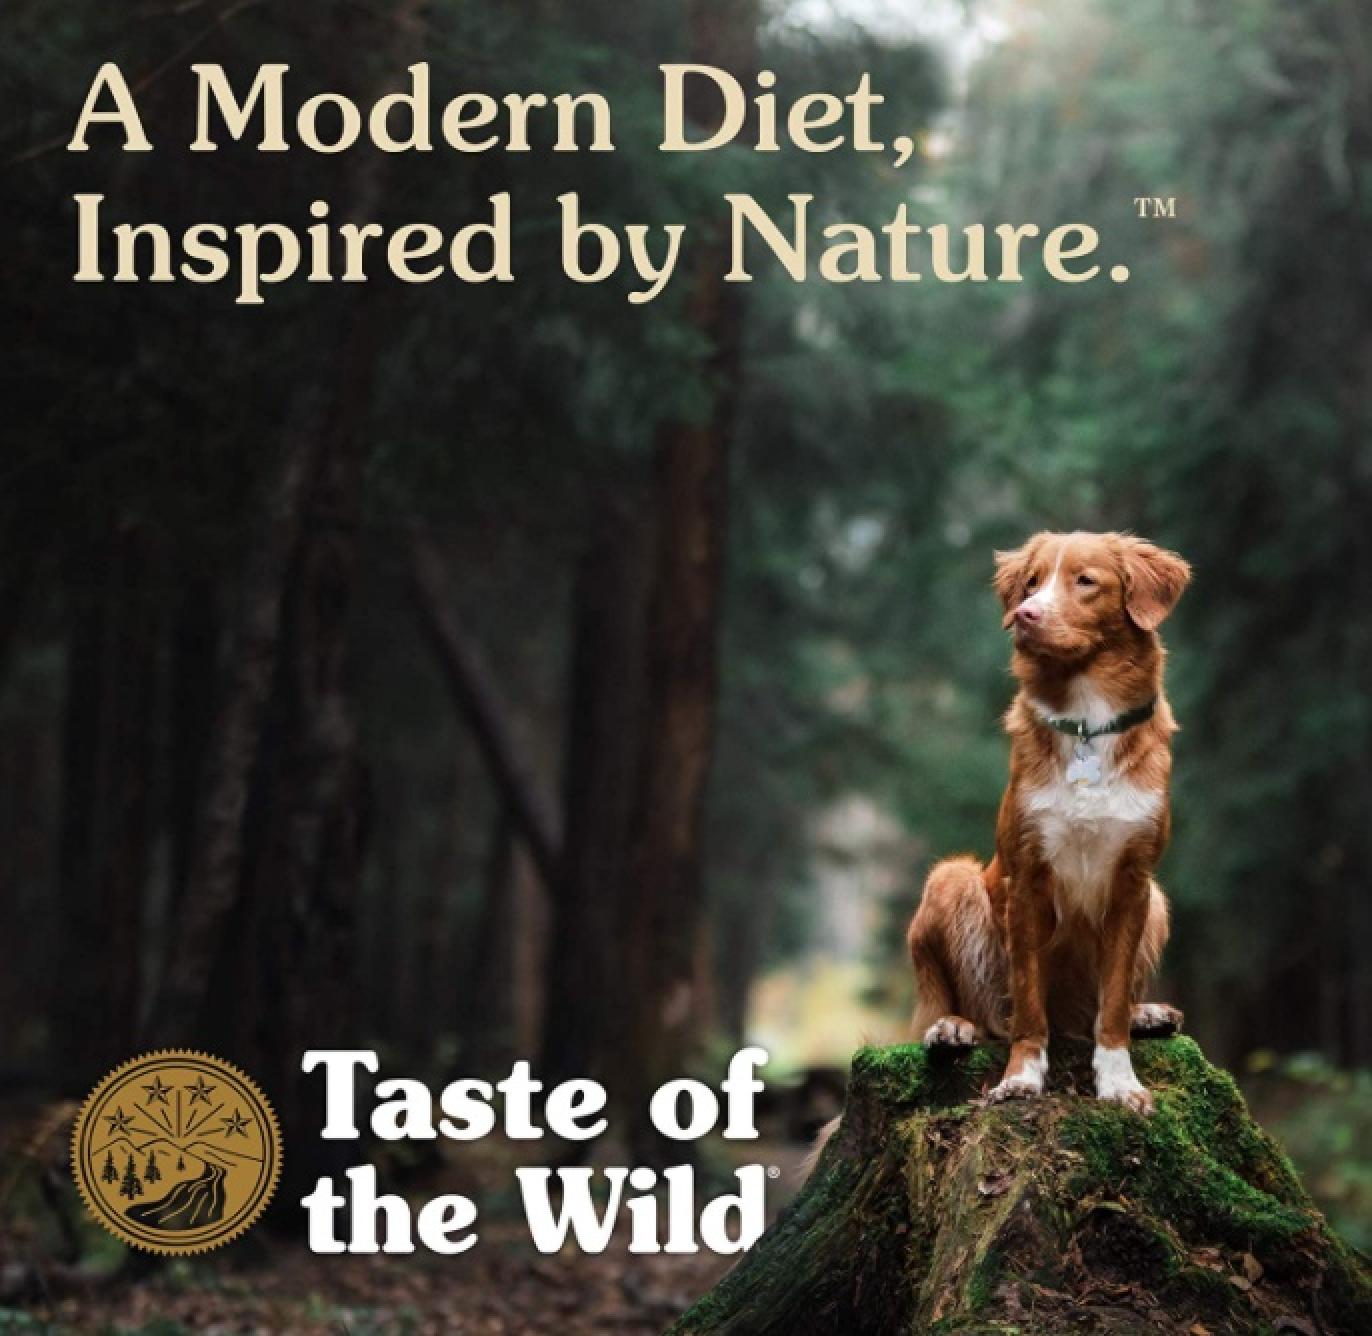 Taste of the Wild Ancient Wetlands with Roasted Fowl and Ancient Grains